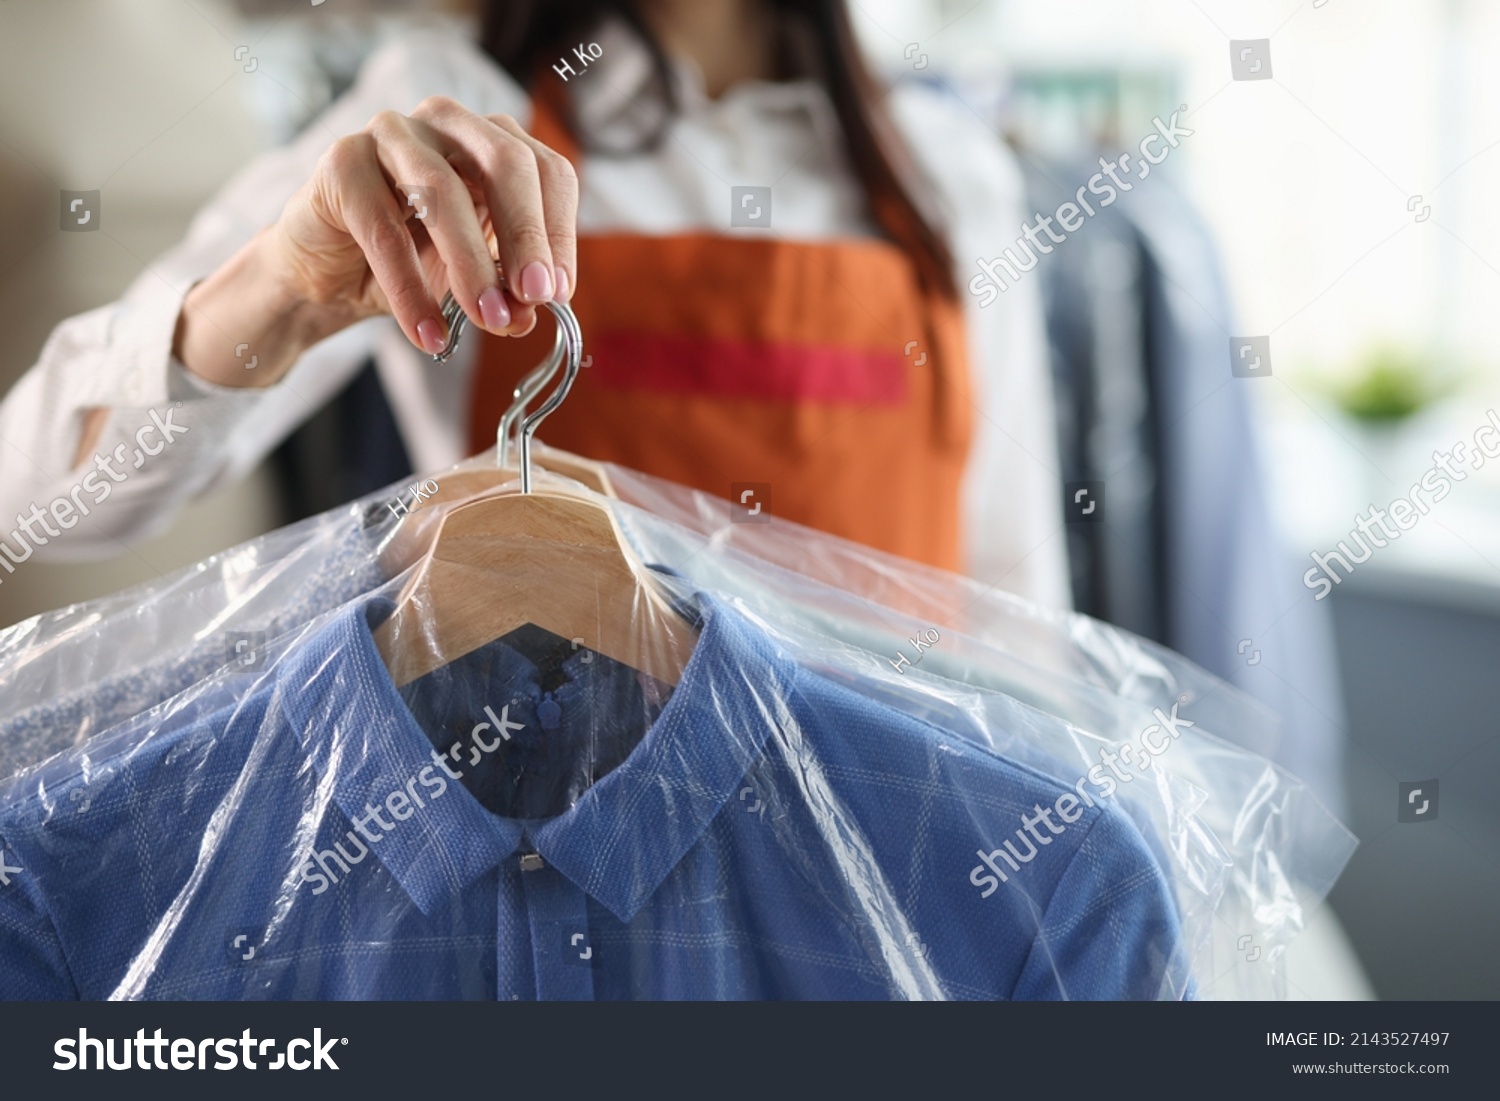 Administrator at dry cleaners keeps clean clothes on hangers in bag #2143527497